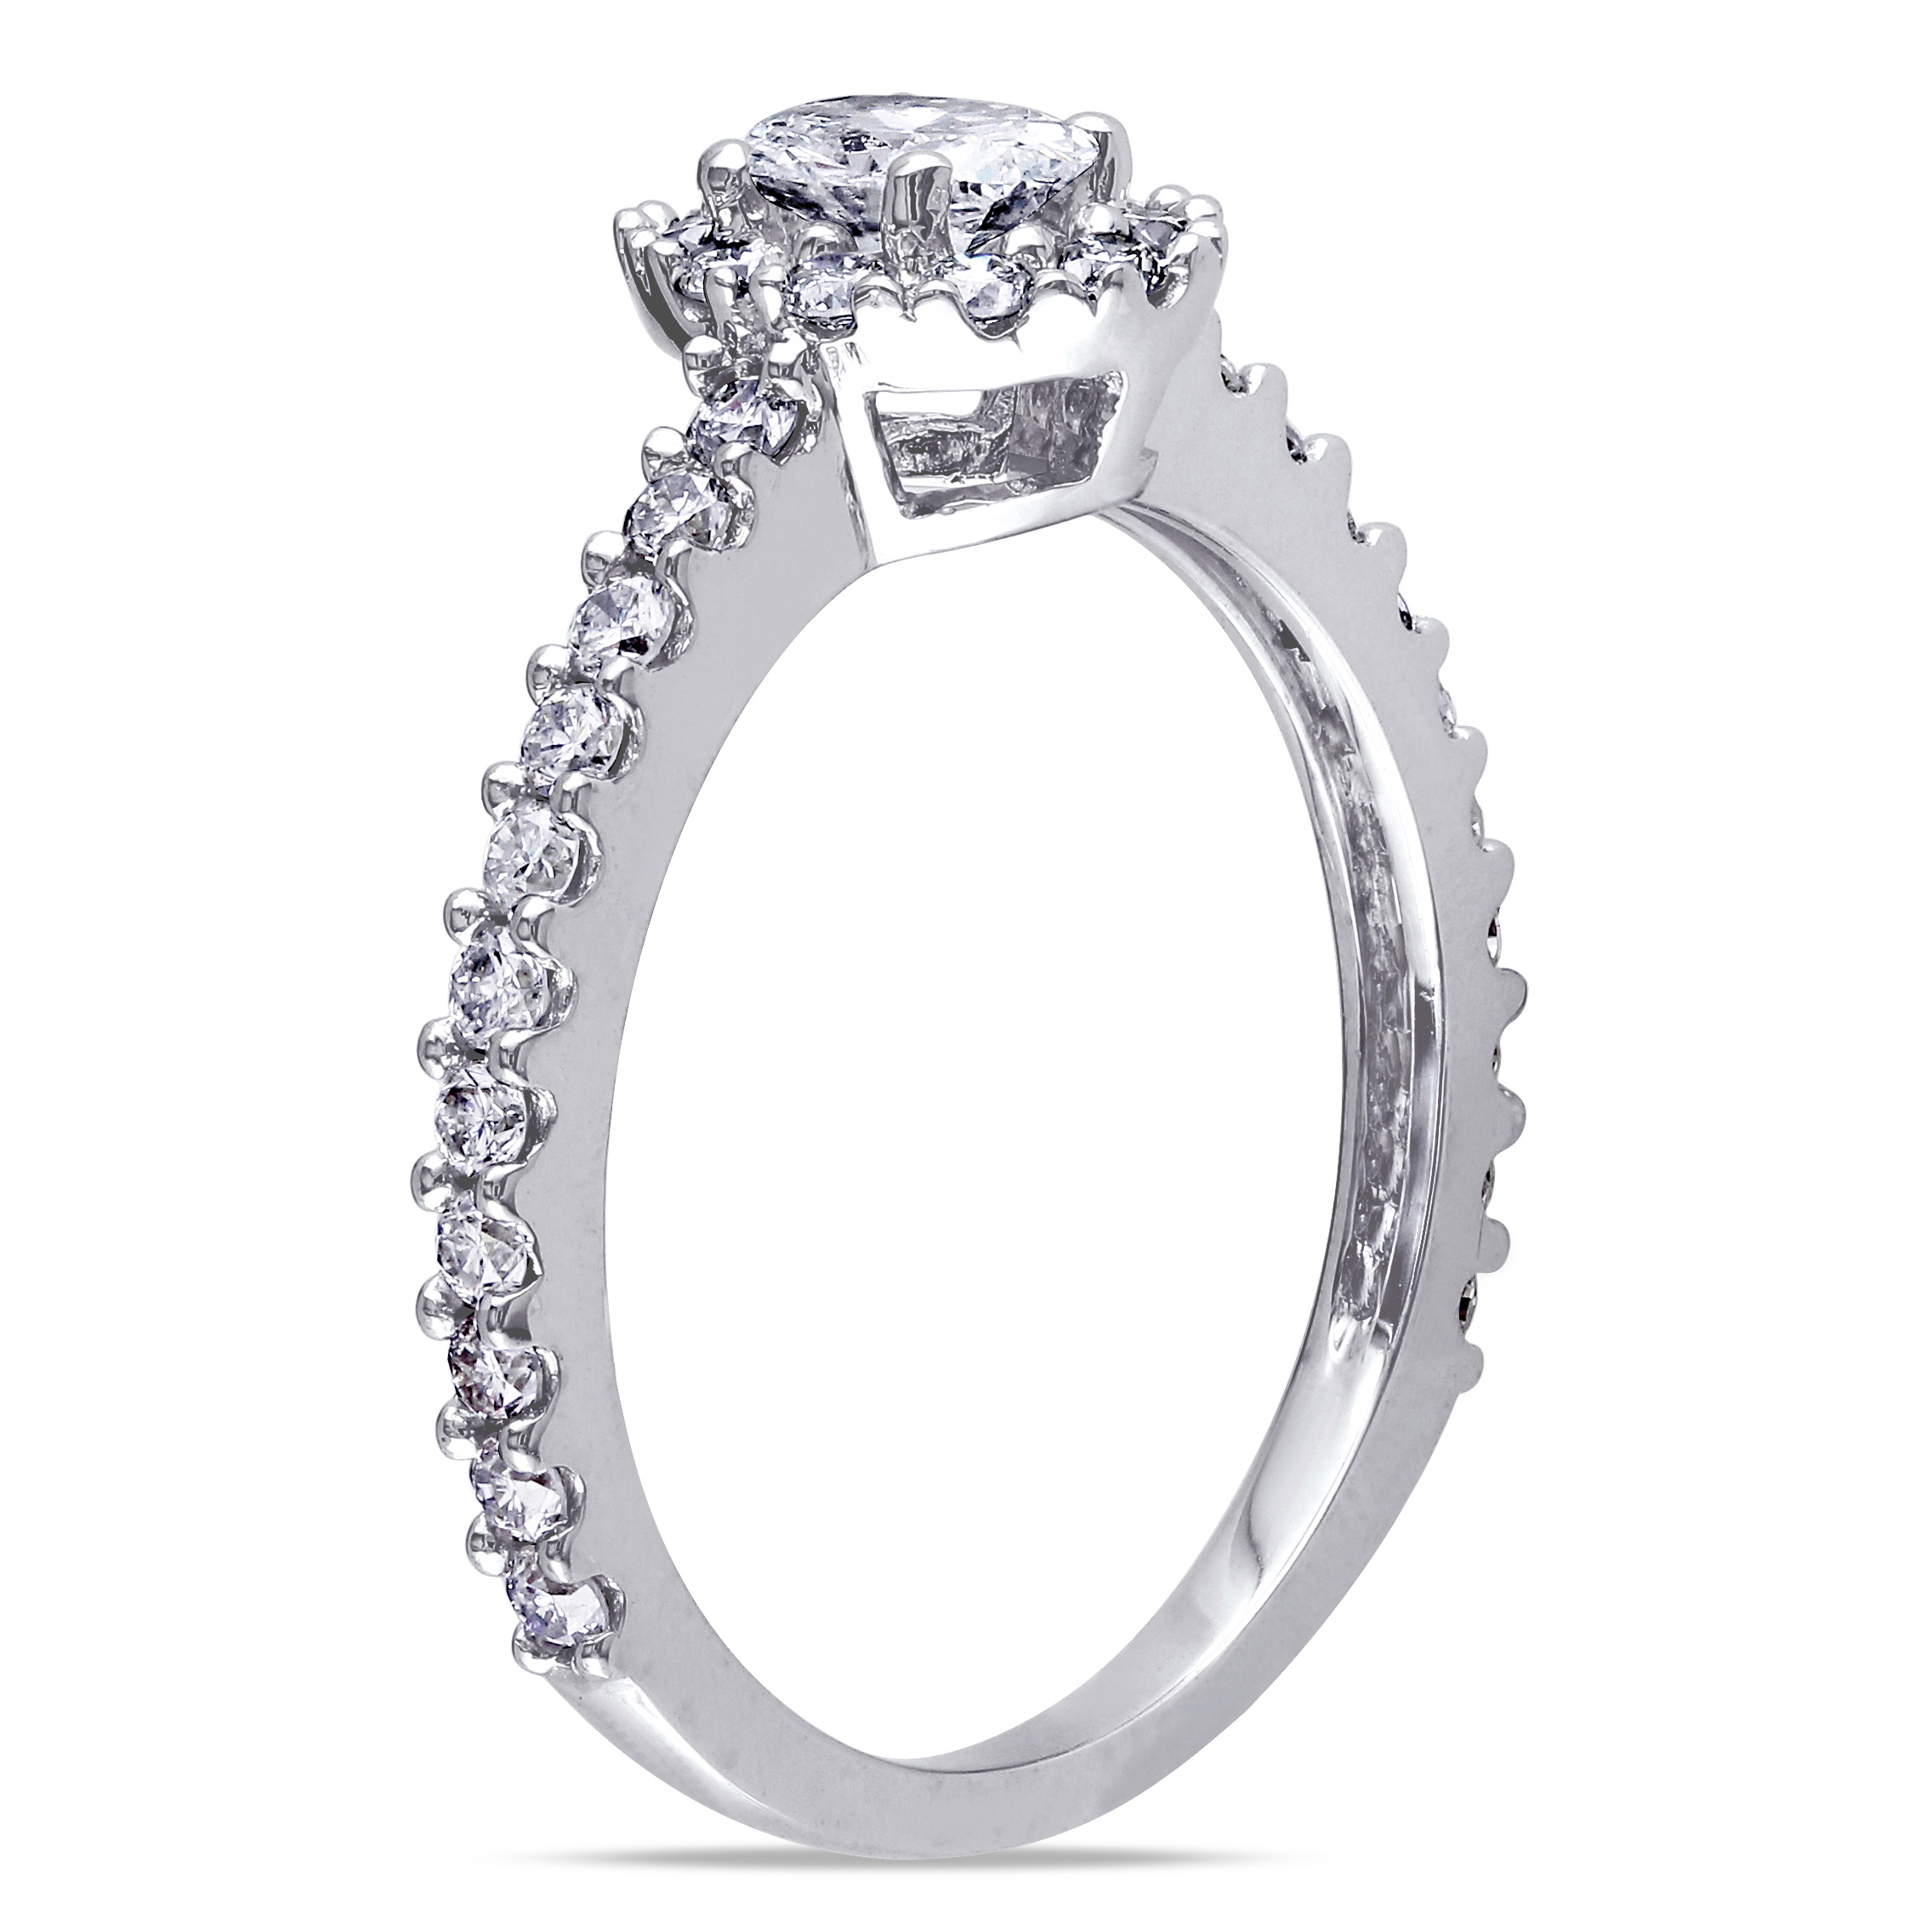 1 CT TW Oval Halo Diamond Engagement Ring in 14k White Gold